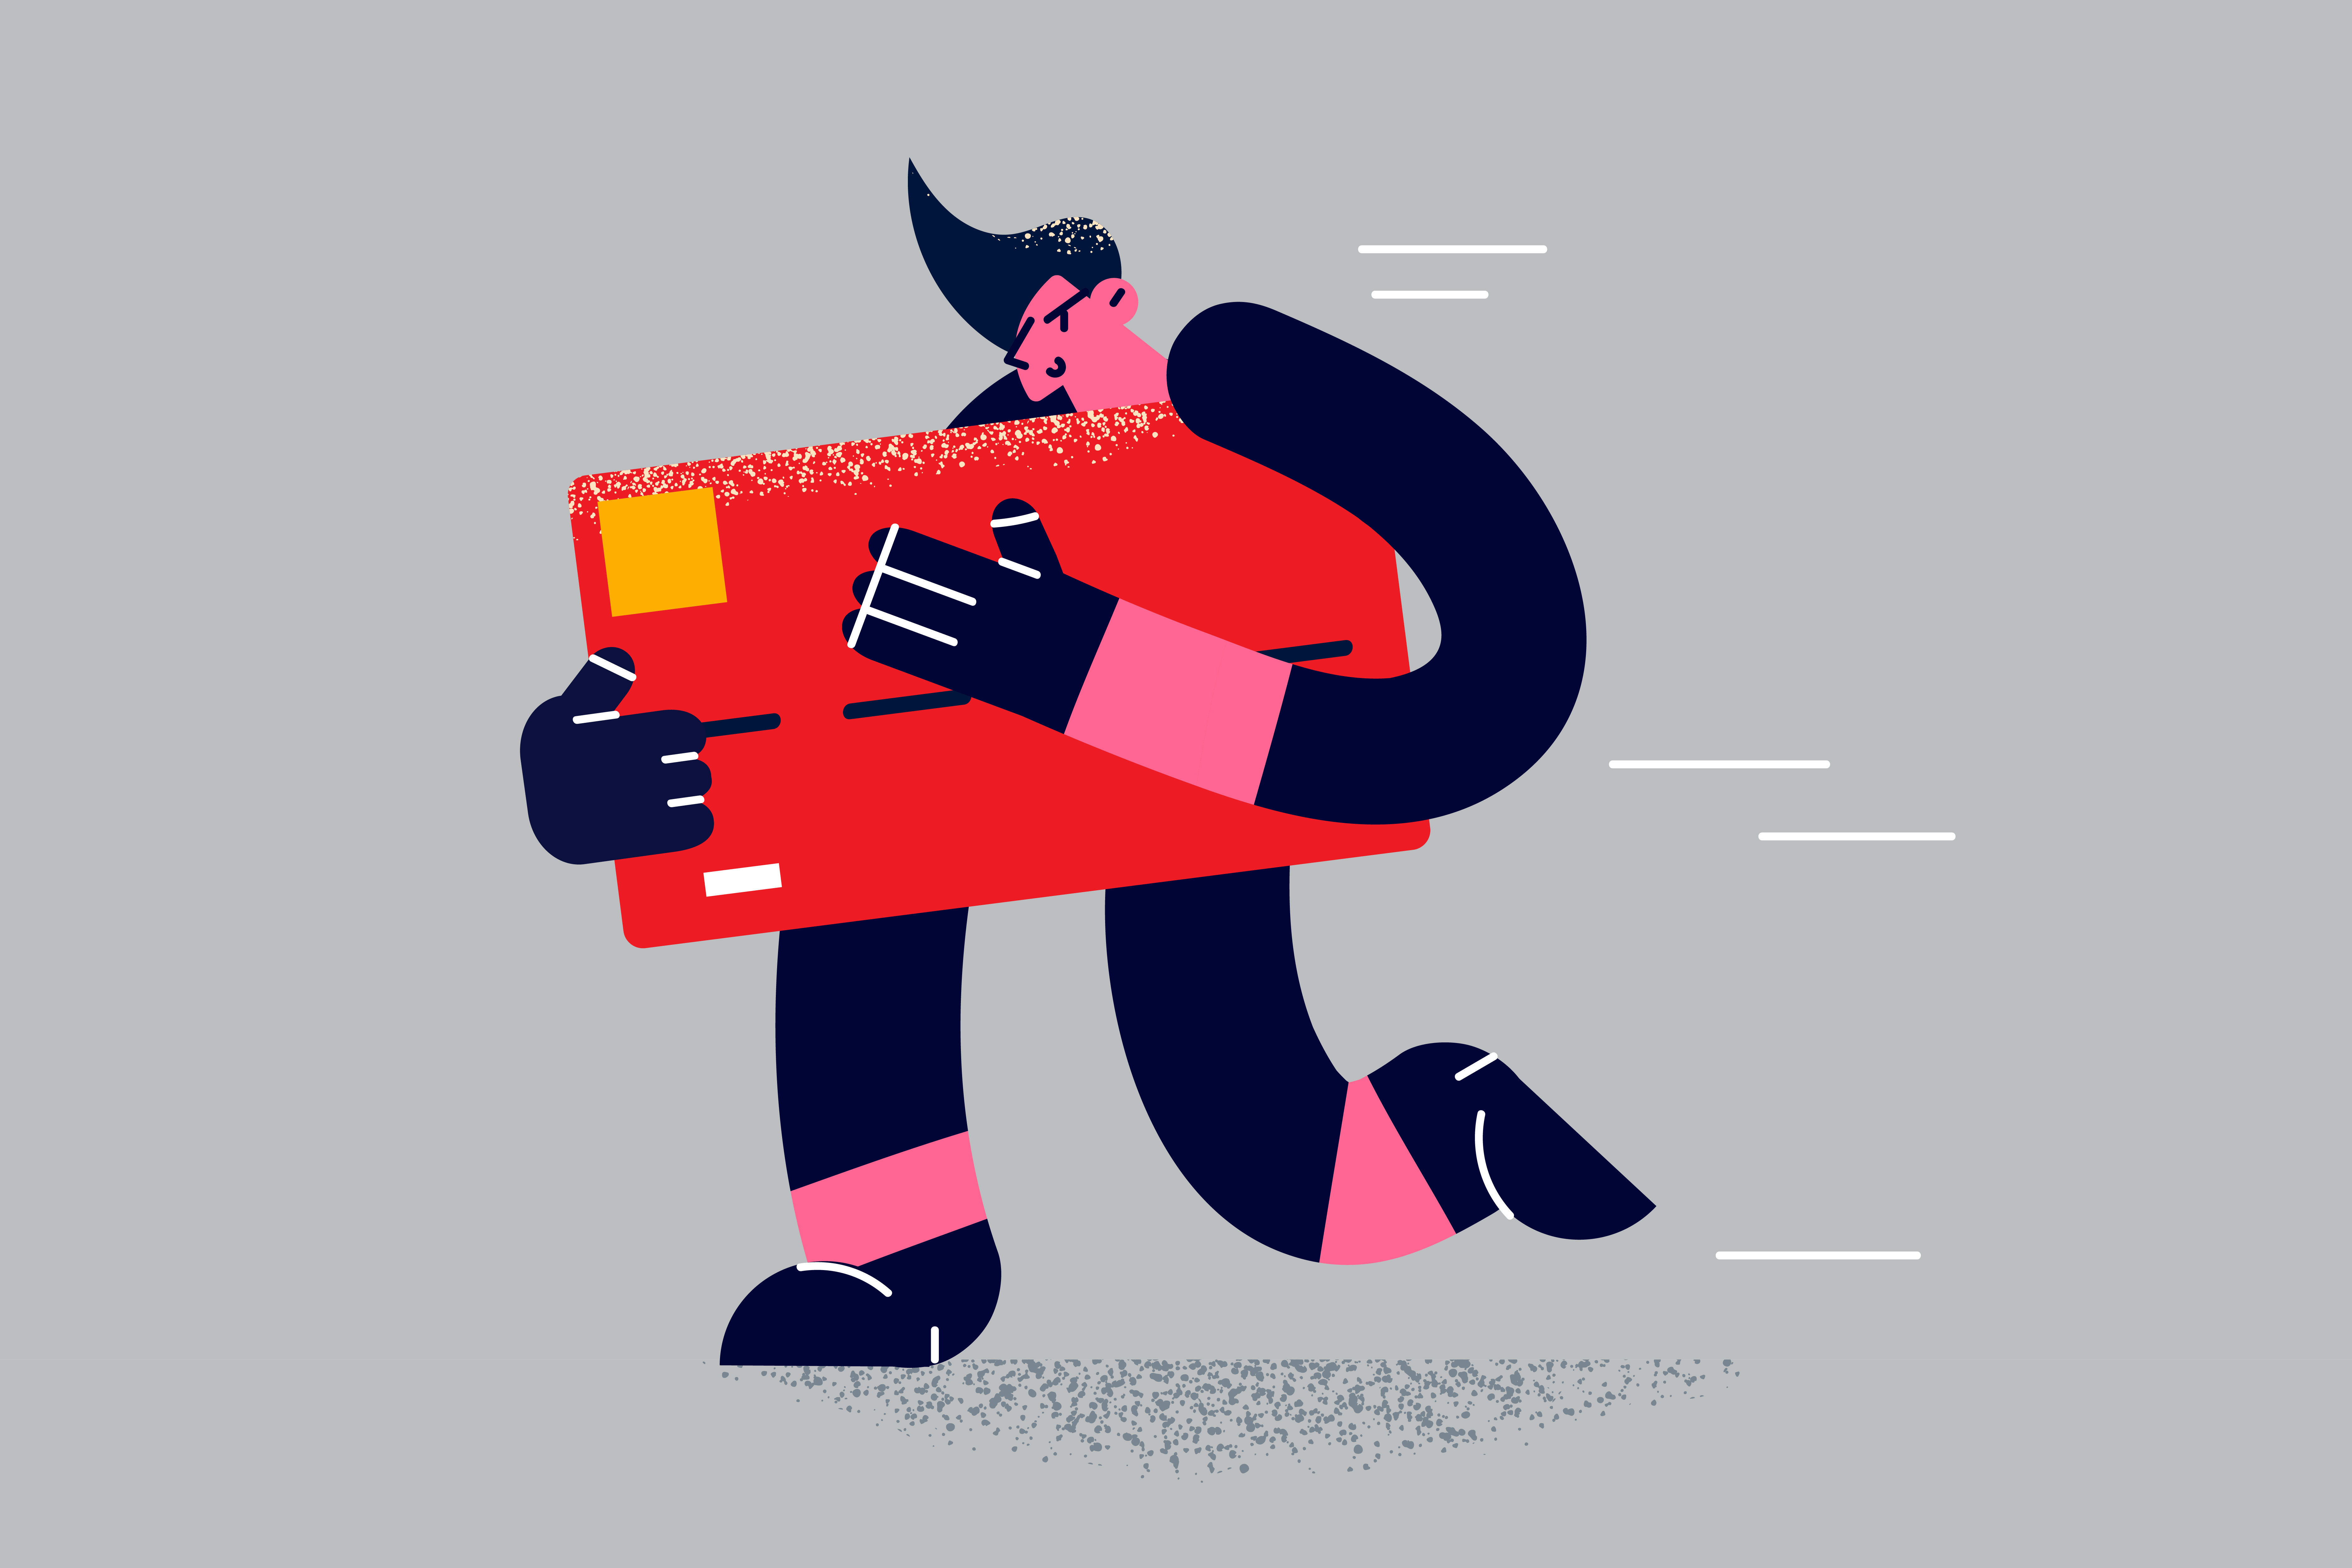 An illustration of a person stealing a giant credit card.